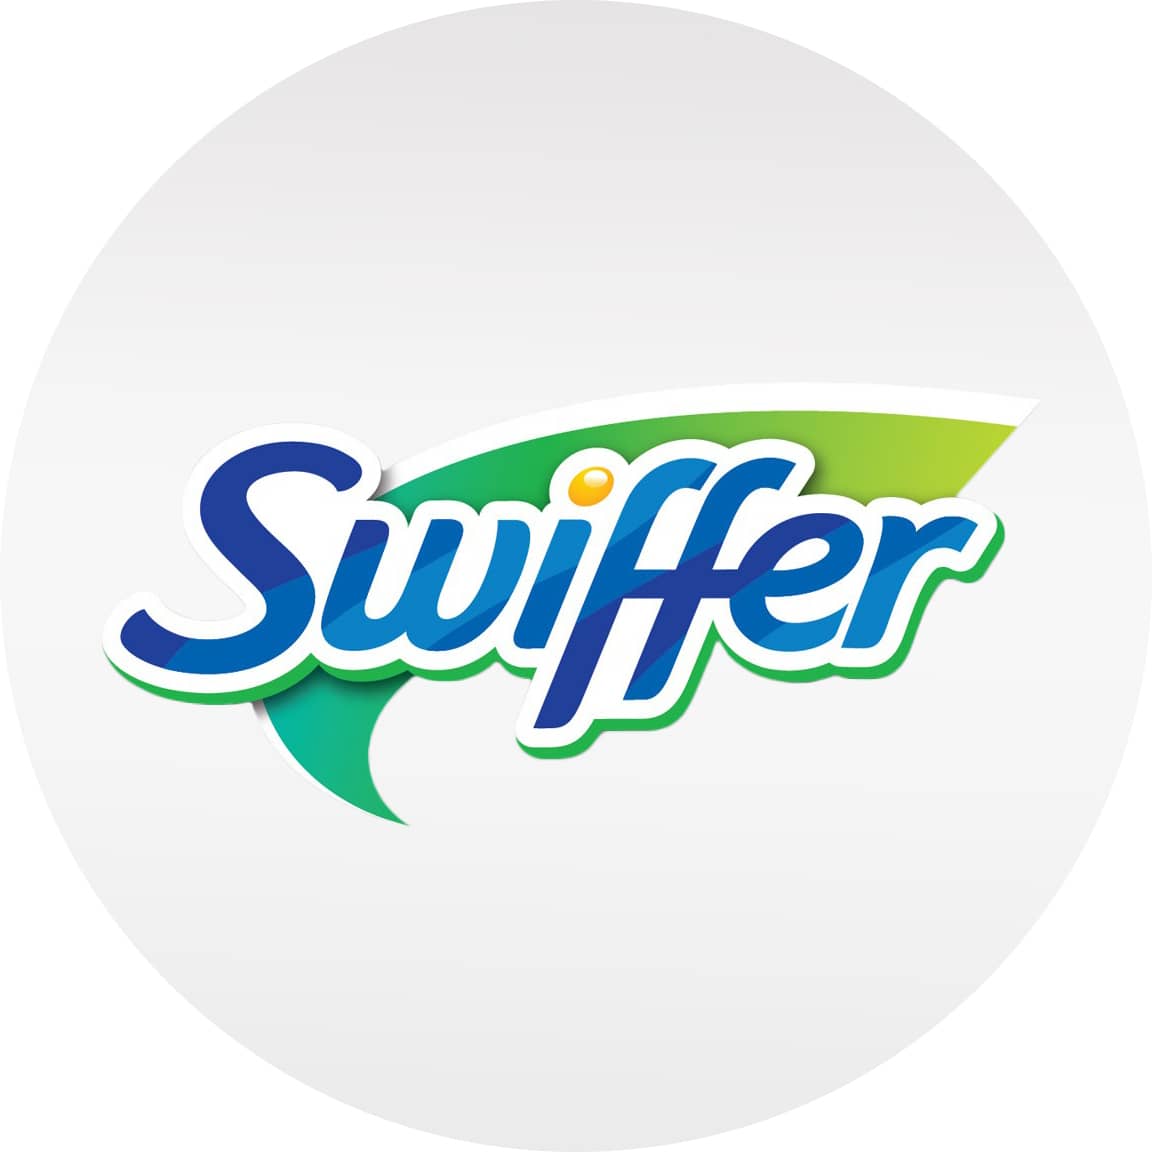 Shop for Swiffer® brand products